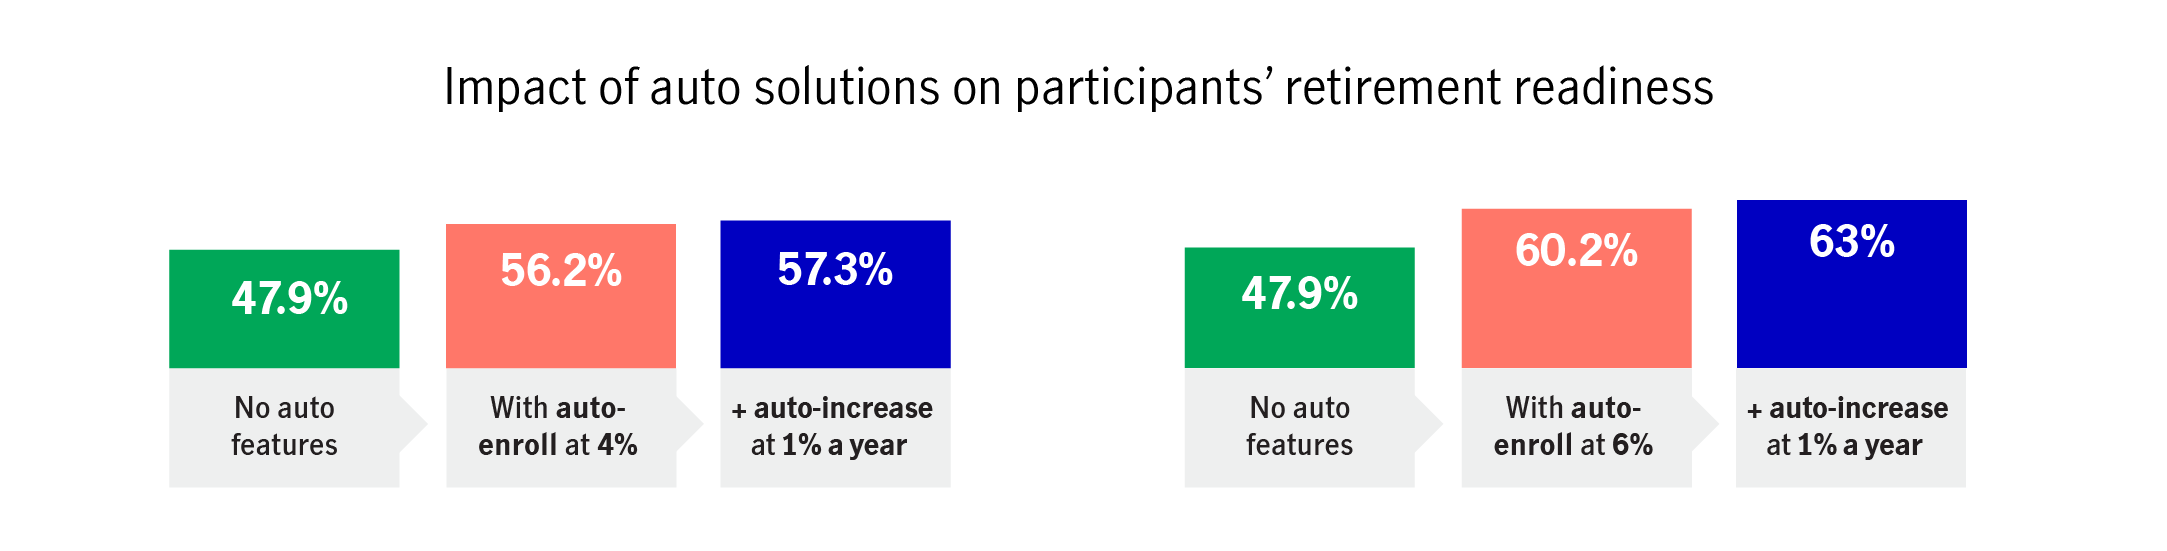 A graphic showing that plans with auto-enroll and auto-increase have substantially higher percentages of retirement ready participants than those without these features.